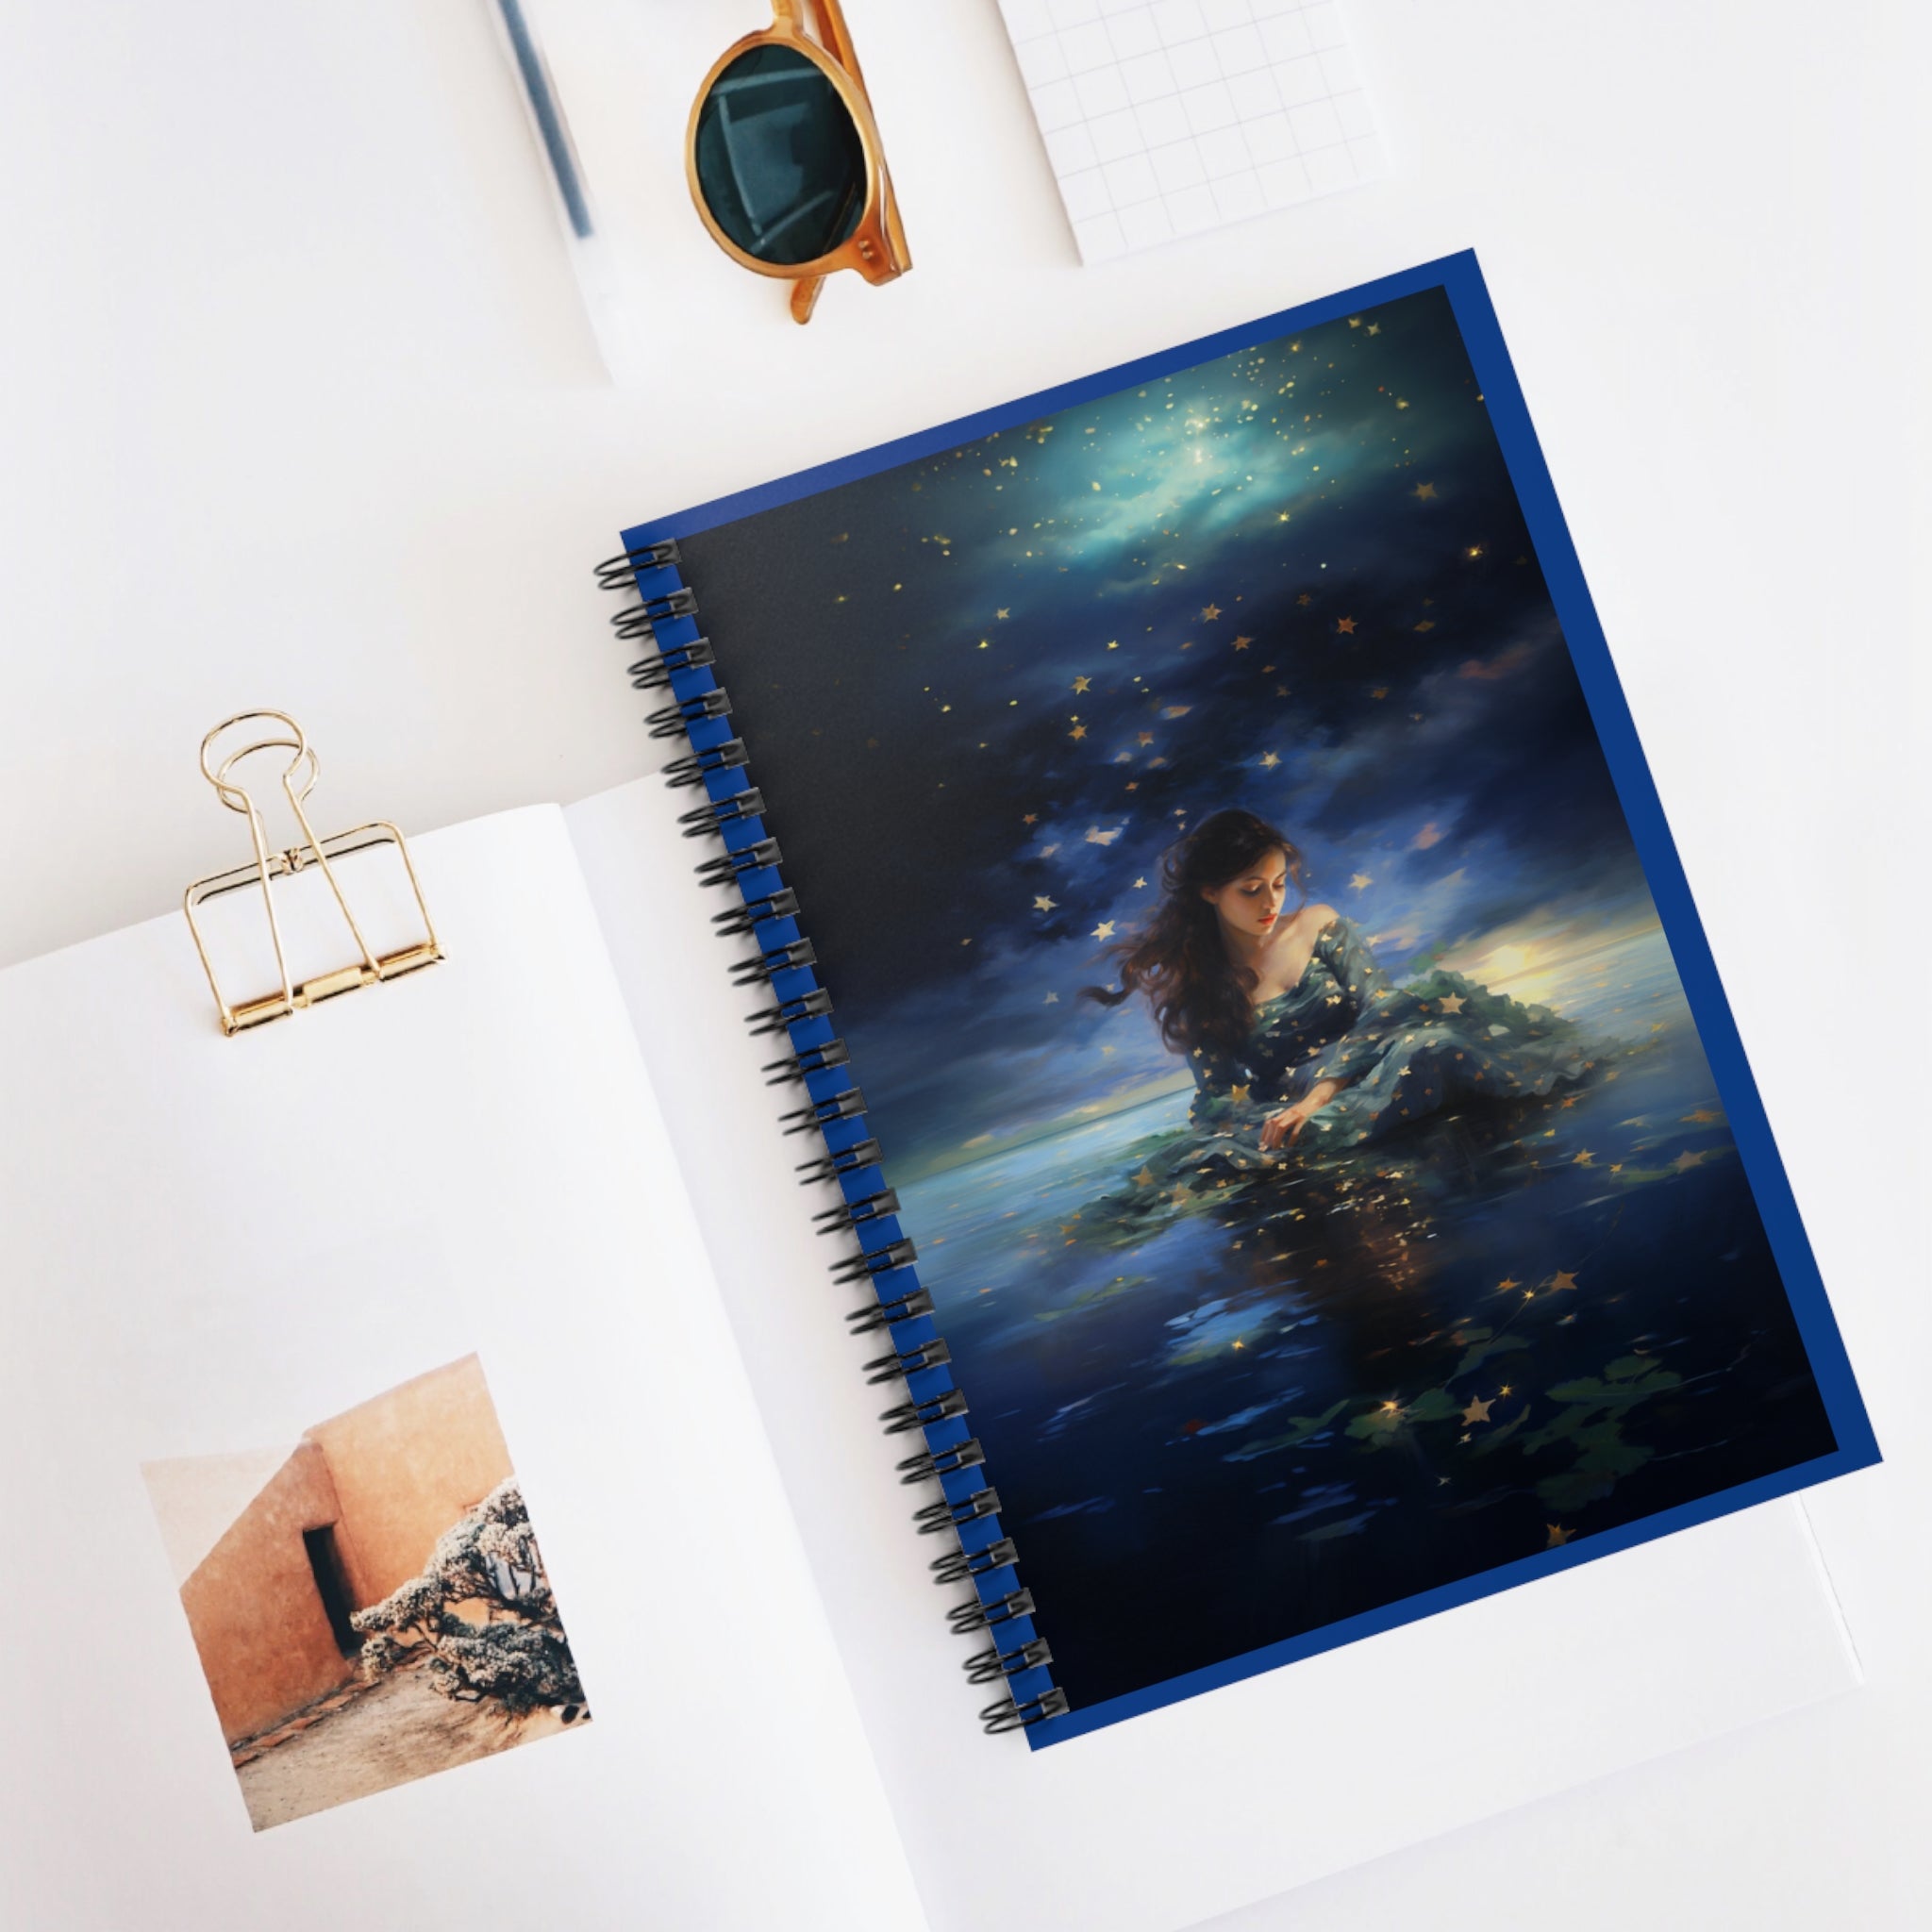 Starry Skies and Water Reflections - Spiral Notebook - Ruled Line - Spruced Roost